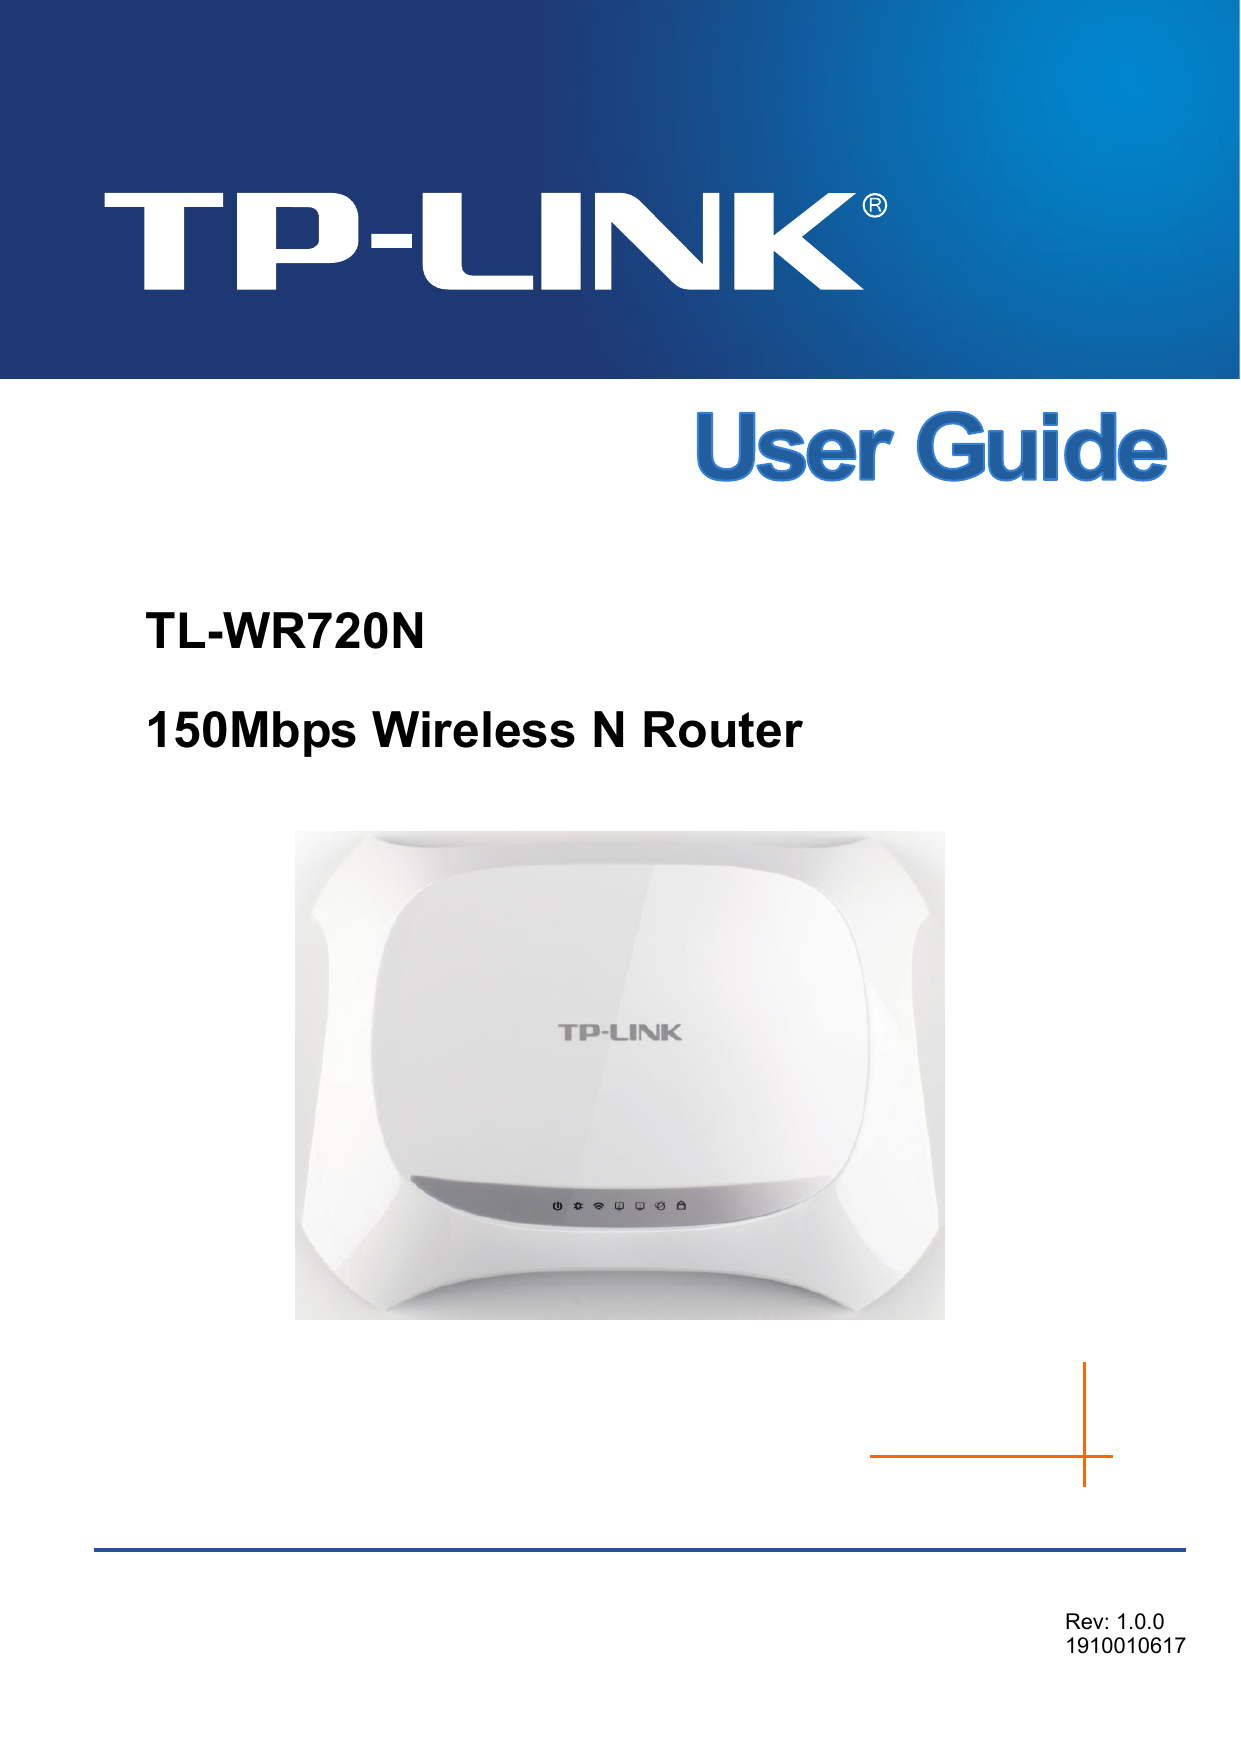    TL-WR720N 150Mbps Wireless N Router   Rev: 1.0.0 1910010617   